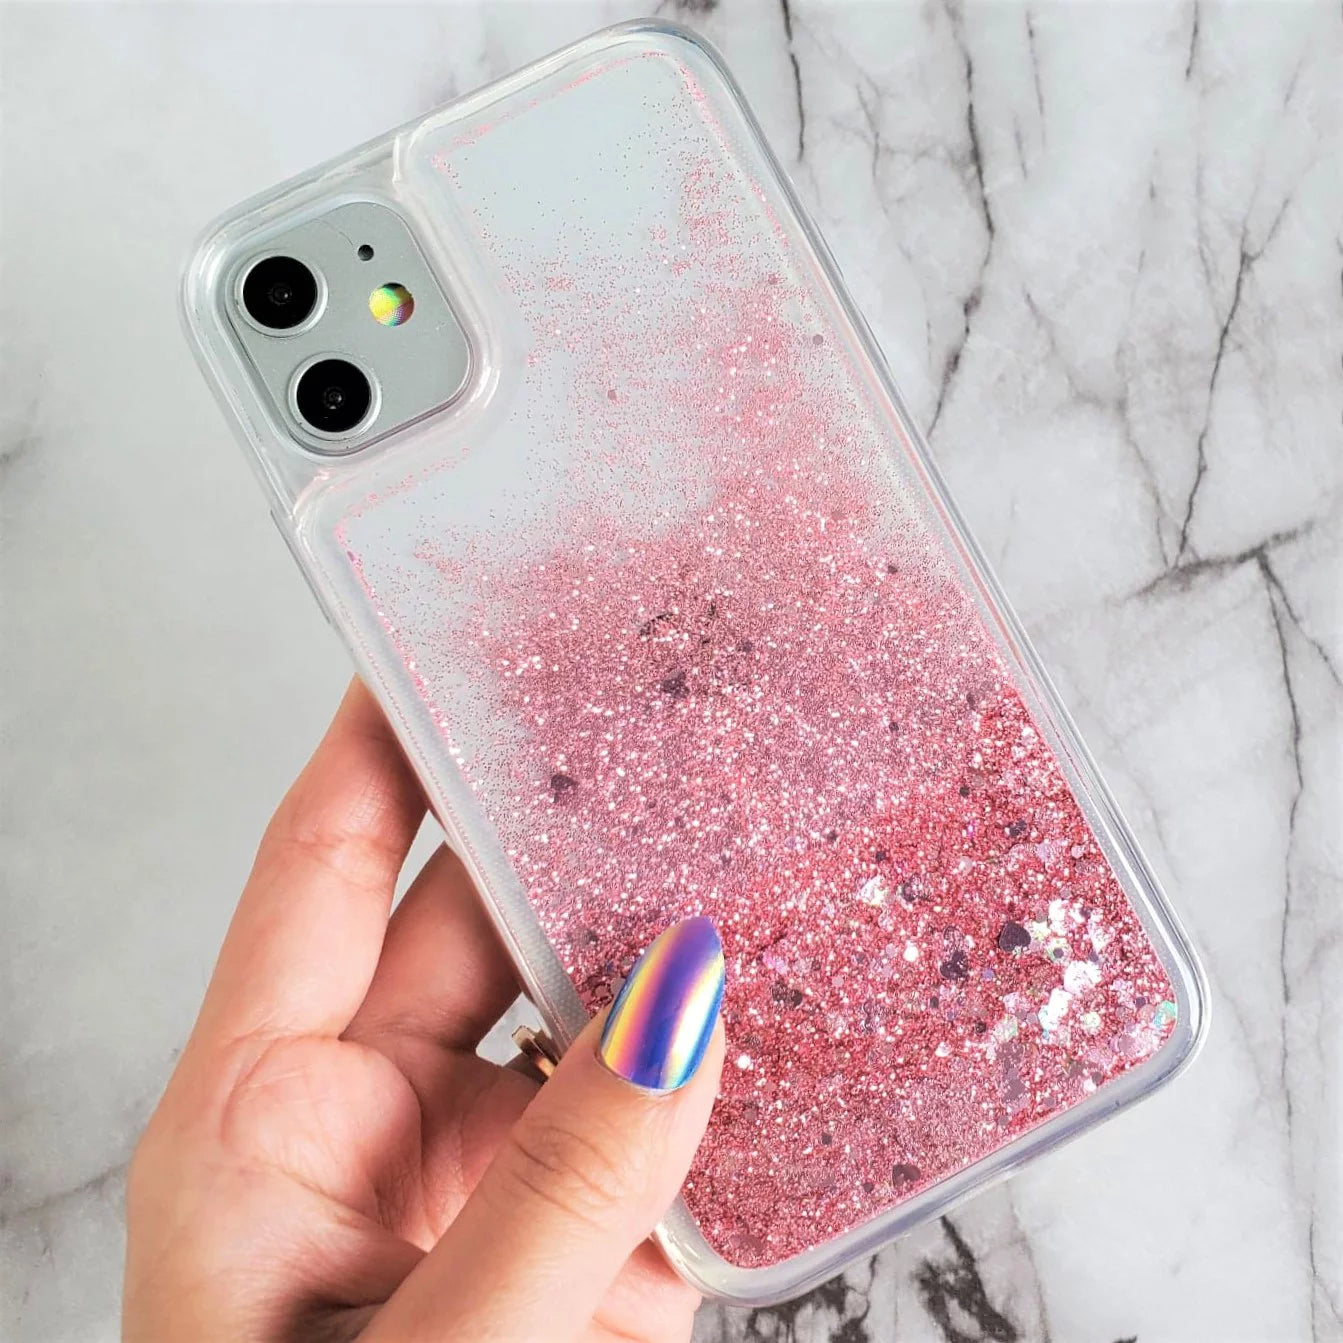 Hard Shockproof  Pink glitter W/ Pink Heart Sparkles Glitter Case for iPhone 11 / 12